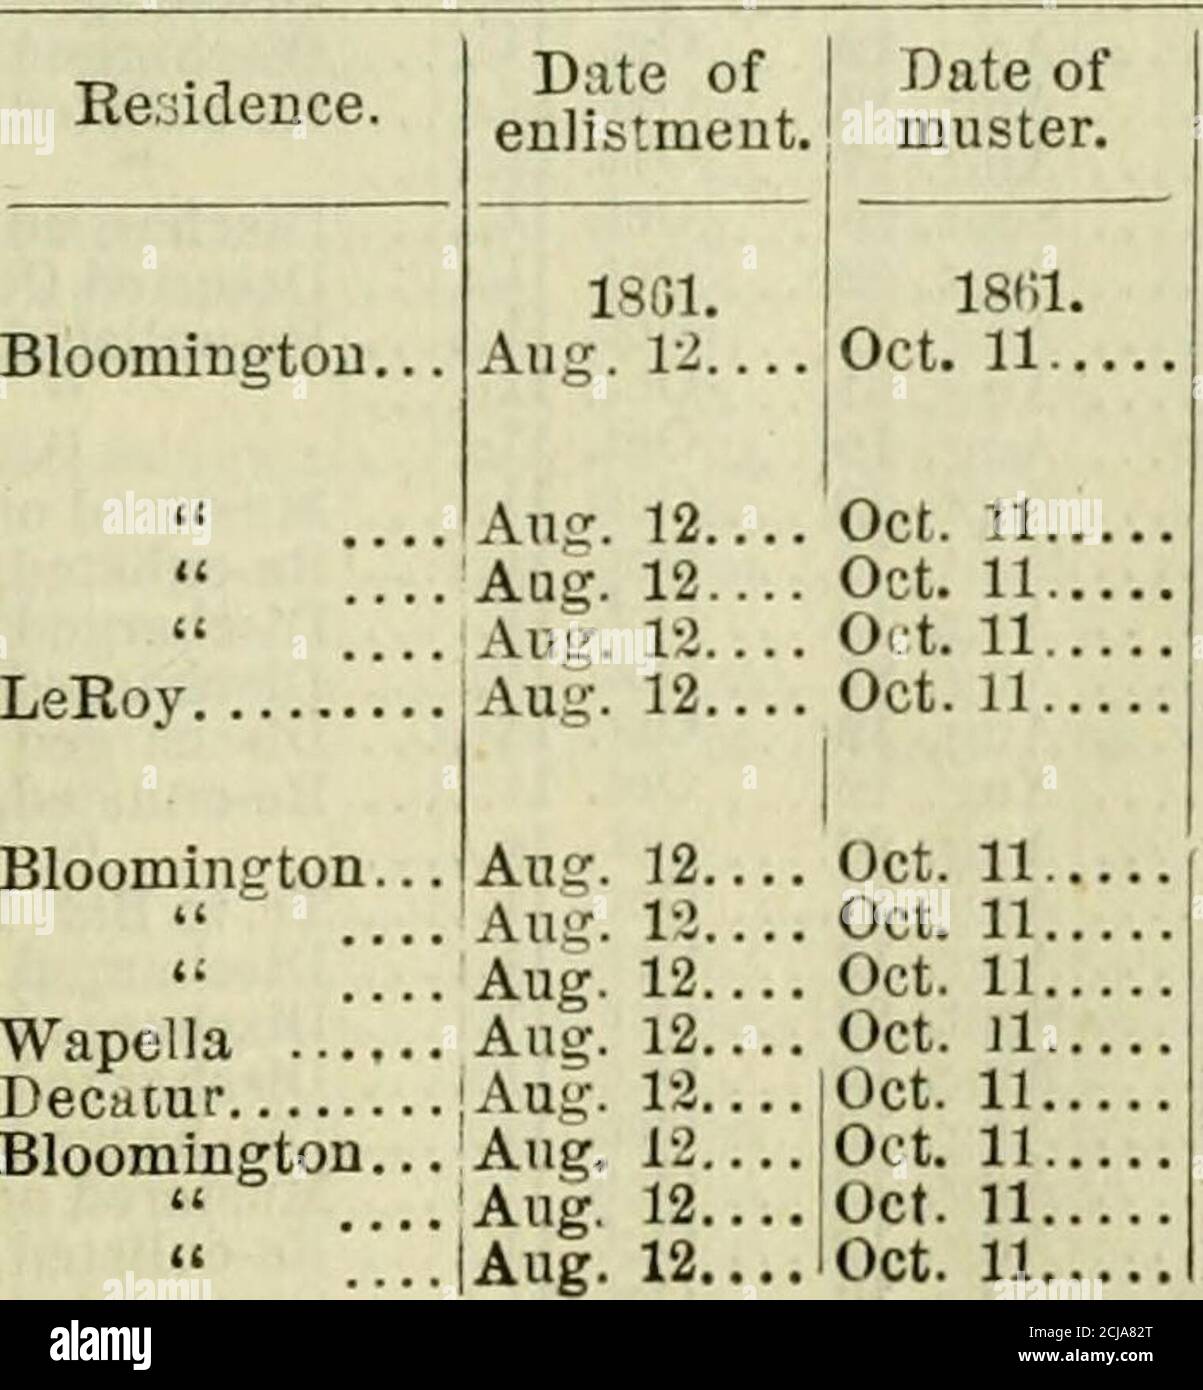 . Report of the adjutant general of the state of Illinois ... [1861-1866] . bility . Musteied out Dec. 6, 18 5 Died at Phila., Sept. 20,1864; wounds .Muste edout .lune 20, 18 5 Musteied out Nov. 2, 1865 Discharged Dec. 14, iS64 Discharged Dec. 1, 1862; disability .. Re-enlisied, as Veteran Musierrd out Dec. 6, 865 Musteied out Jan. 27, 1866 Deserted Oct. 25, 18.5 Musteied out Dec. fl, 1865 Died at Richmond, Vj., May 1, 1865. Musteied out Dec. 6, 18:i.Mustered out Dec. 6, 18i:5 ENLISTED ME. OF CO.VIPaNY Name and Rank. First Sergeant.George T. Heritage.. Sergeants. Al. C Sweetzer James Gibson L Stock Photo